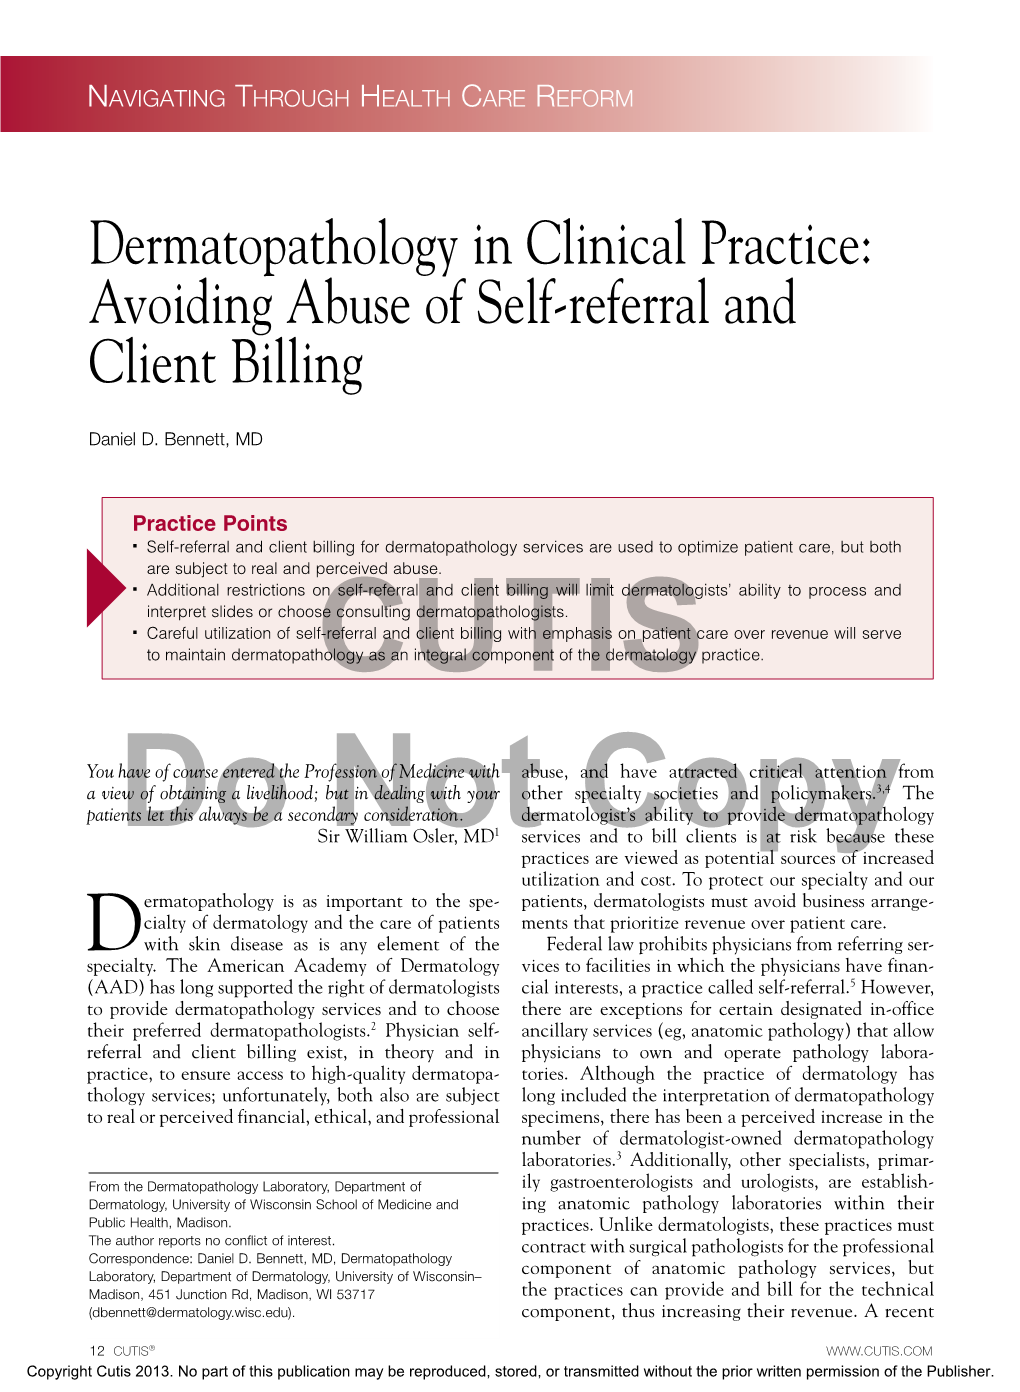 Dermatopathology in Clinical Practice: Avoiding Abuse of Self-Referral and Client Billing